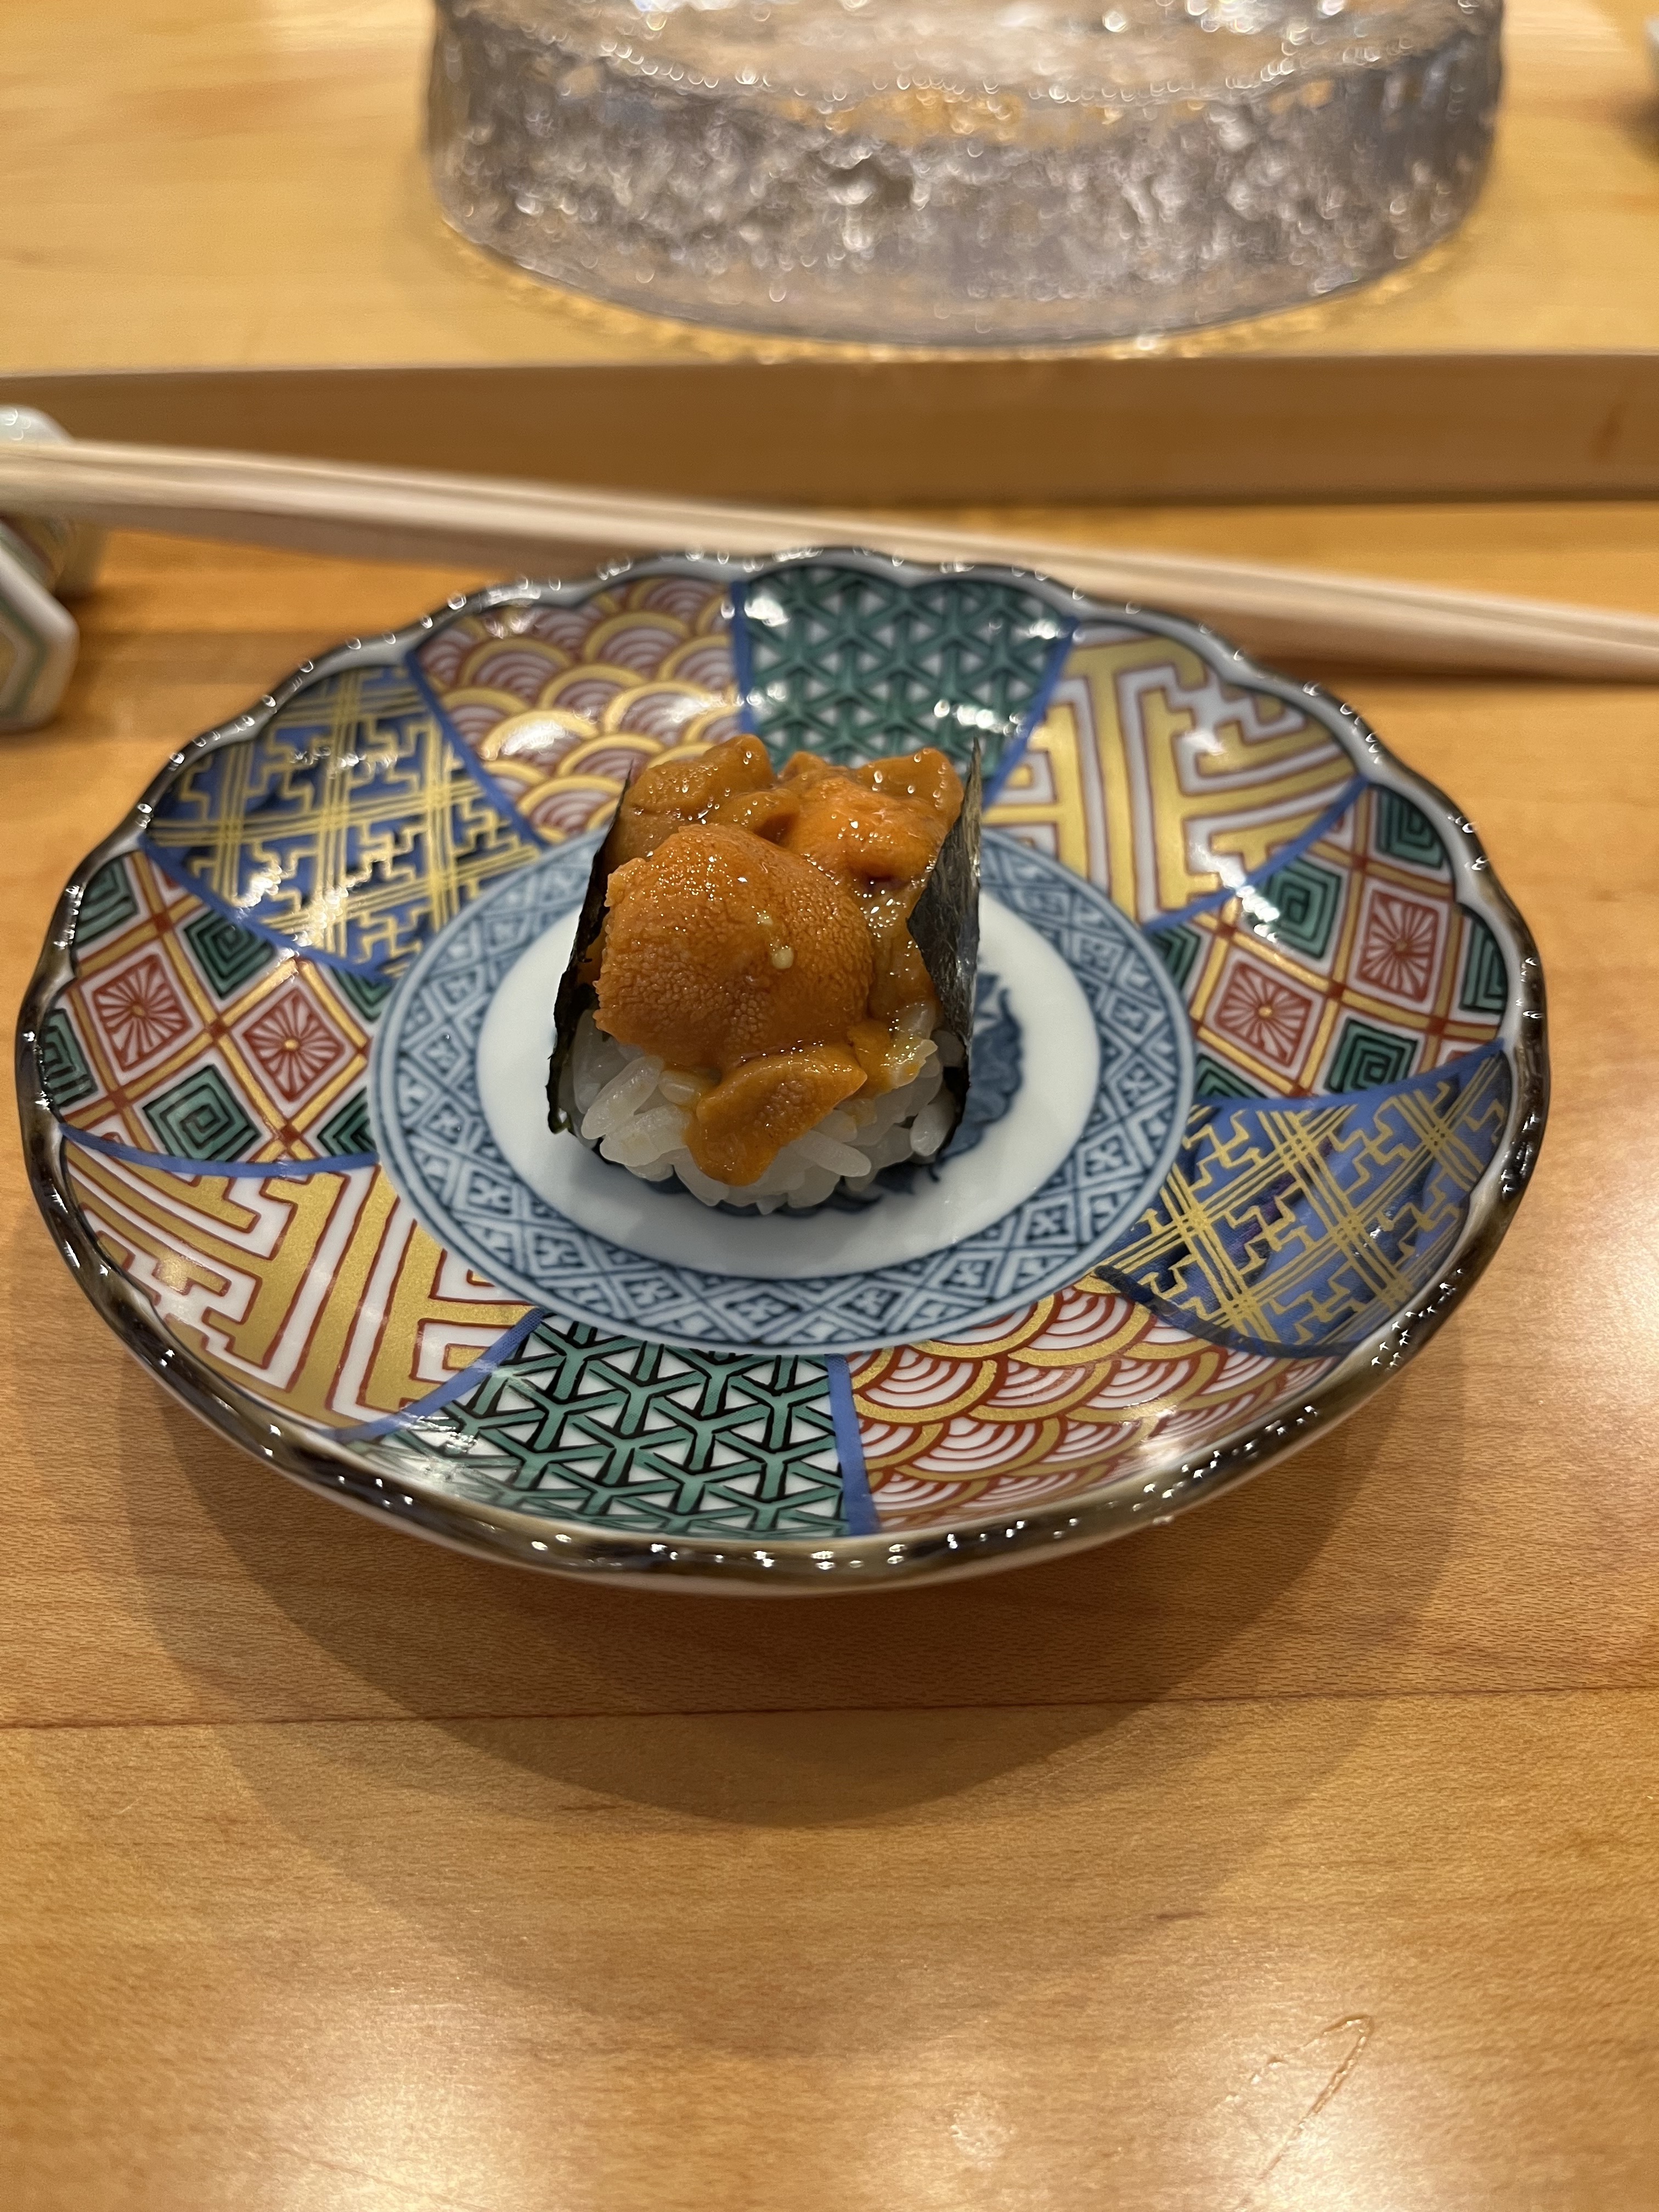 A piece of sushi on a plate